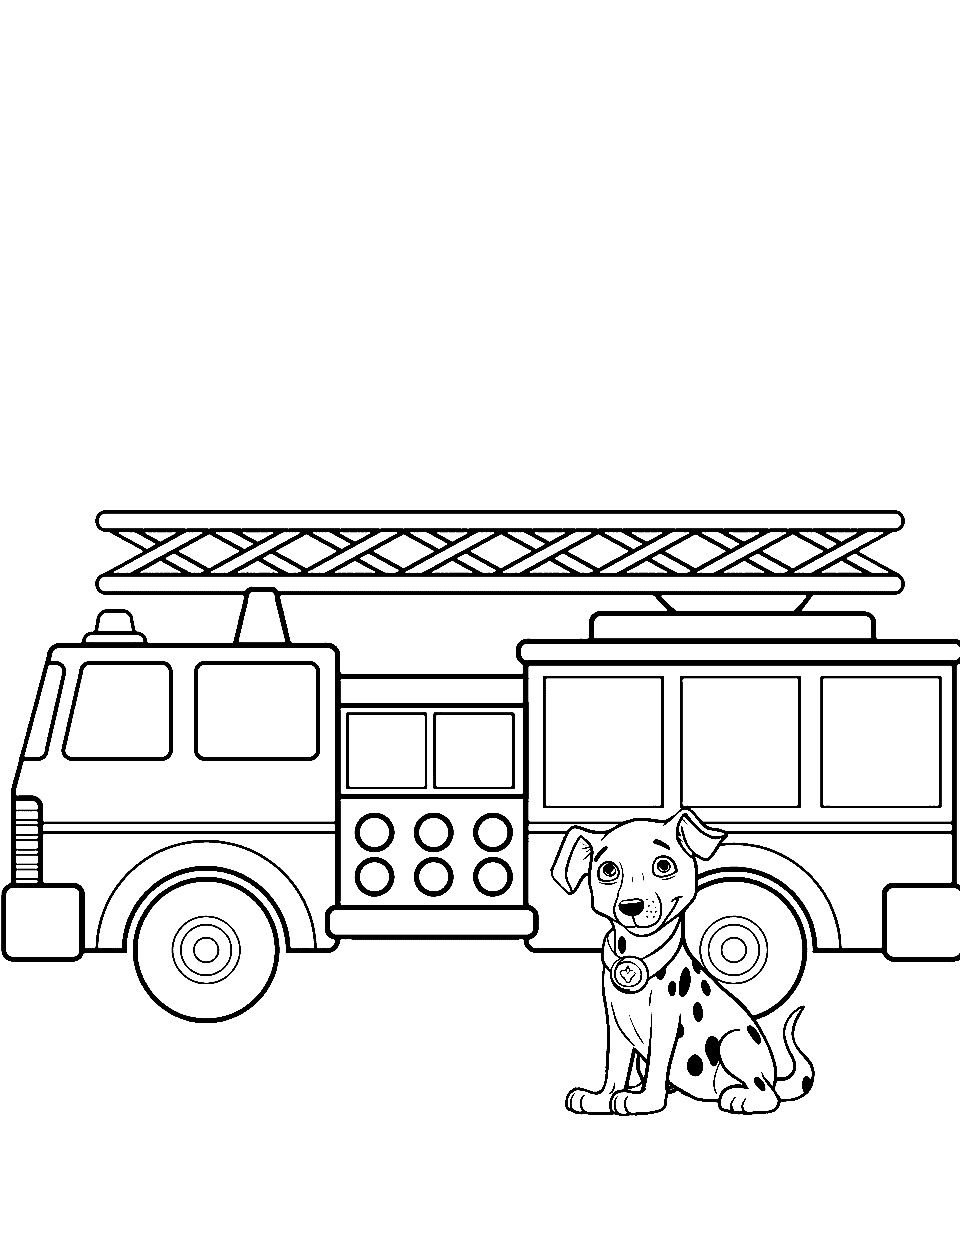 Fire Truck and Dalmatian Coloring Page - A fire truck with a Dalmatian sitting beside it.